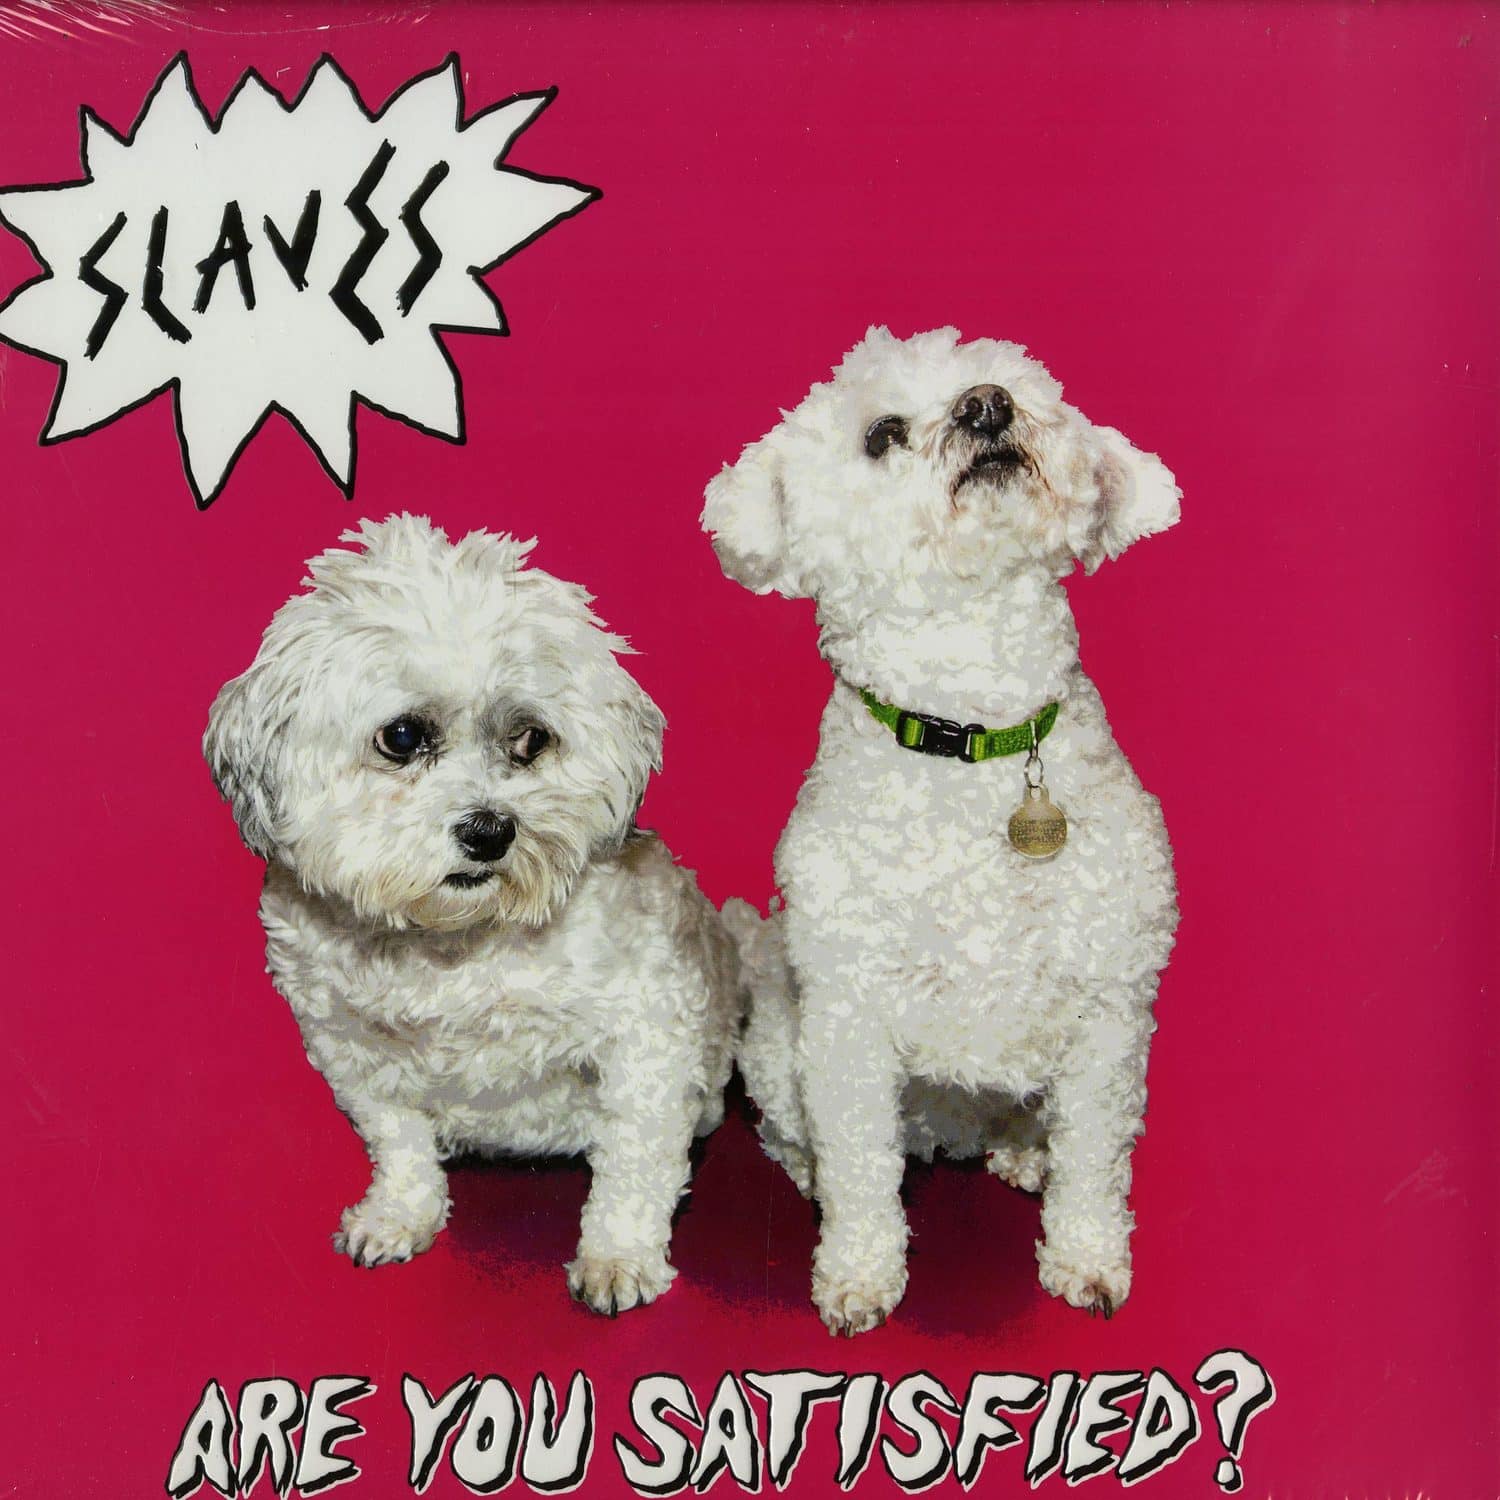 Slaves - ARE YOU SATISFIED? 